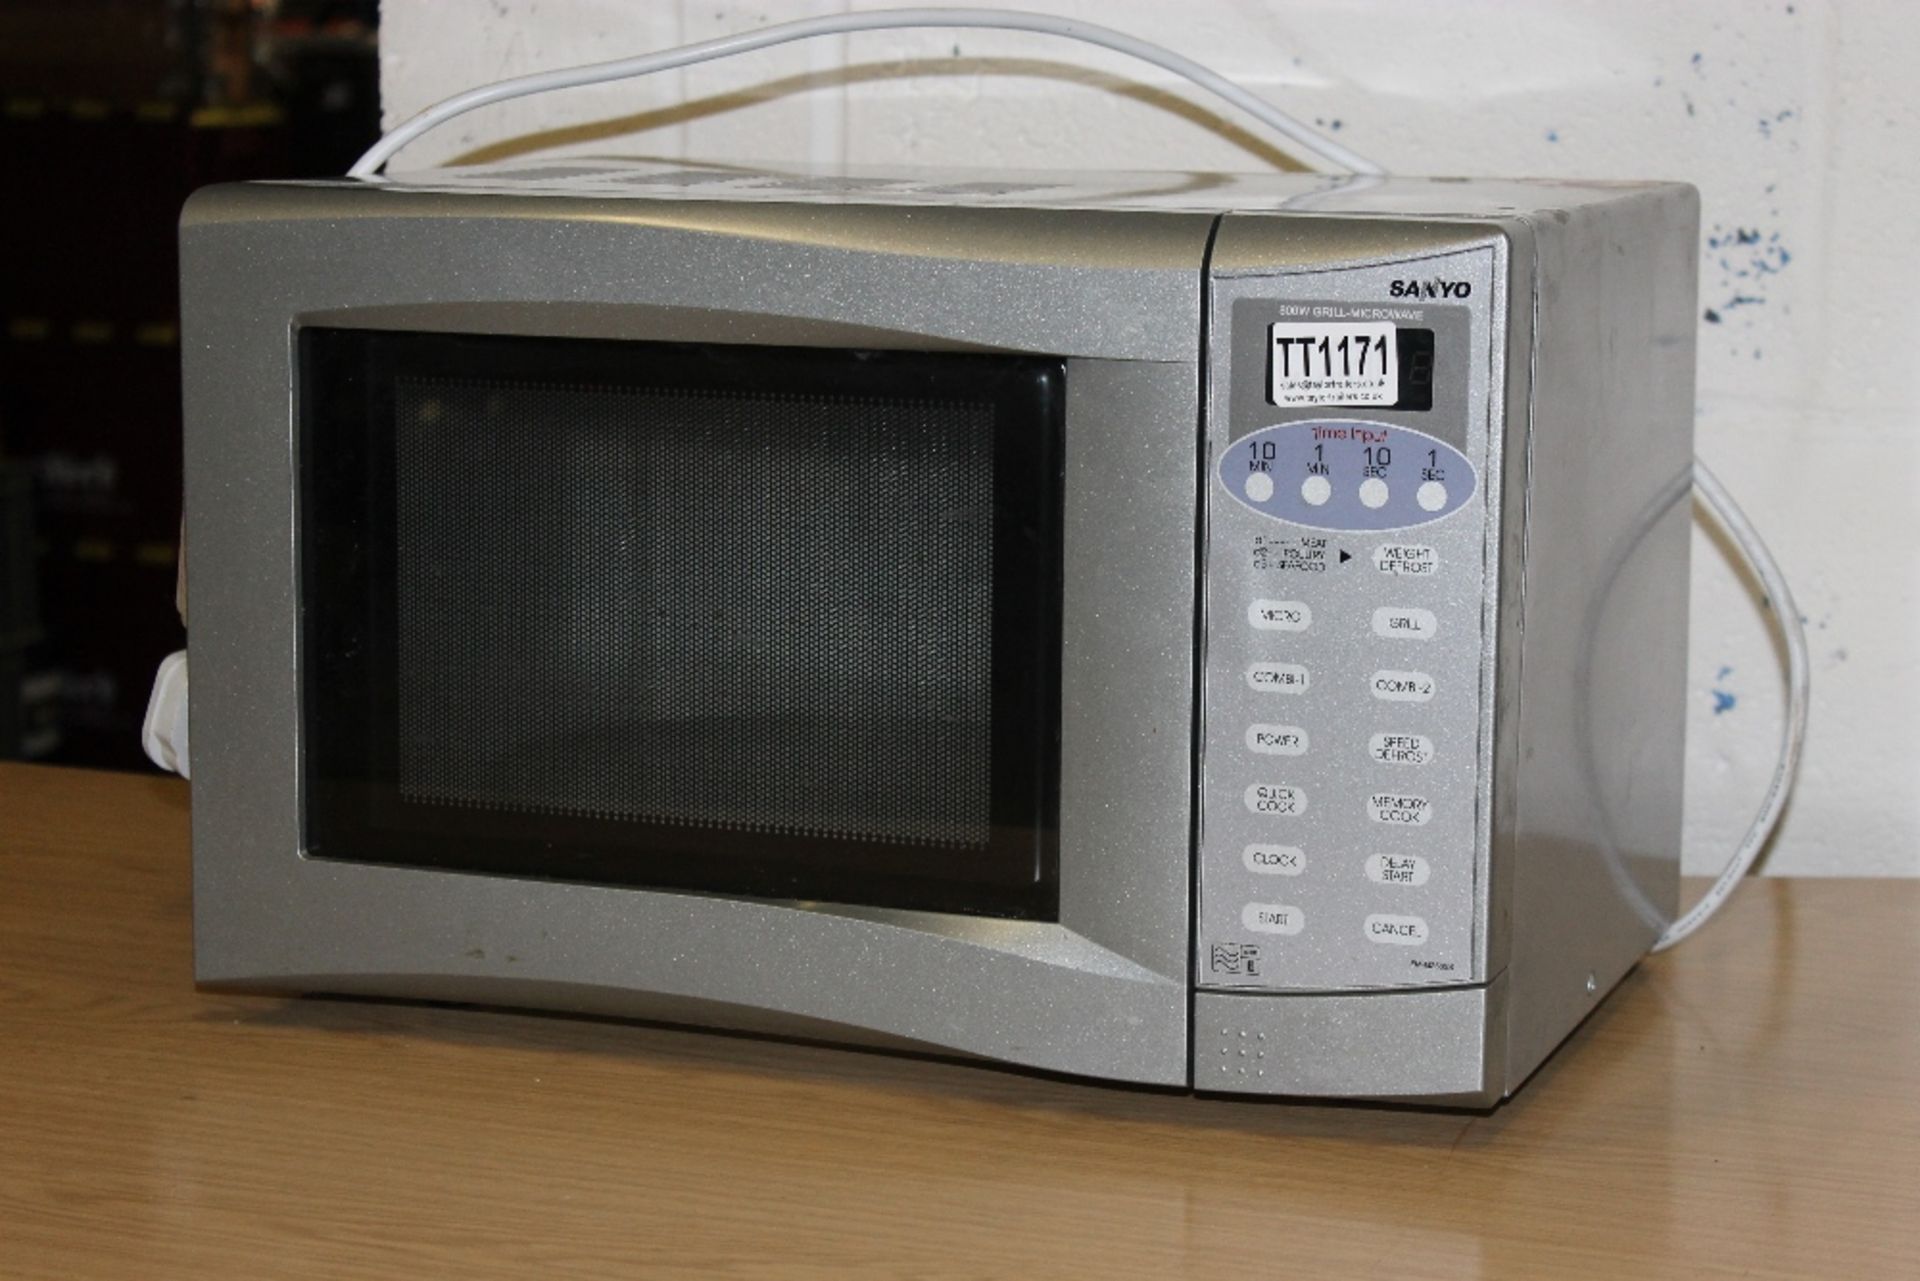 Sanyo 800w Commercial Microwave - Tested Working